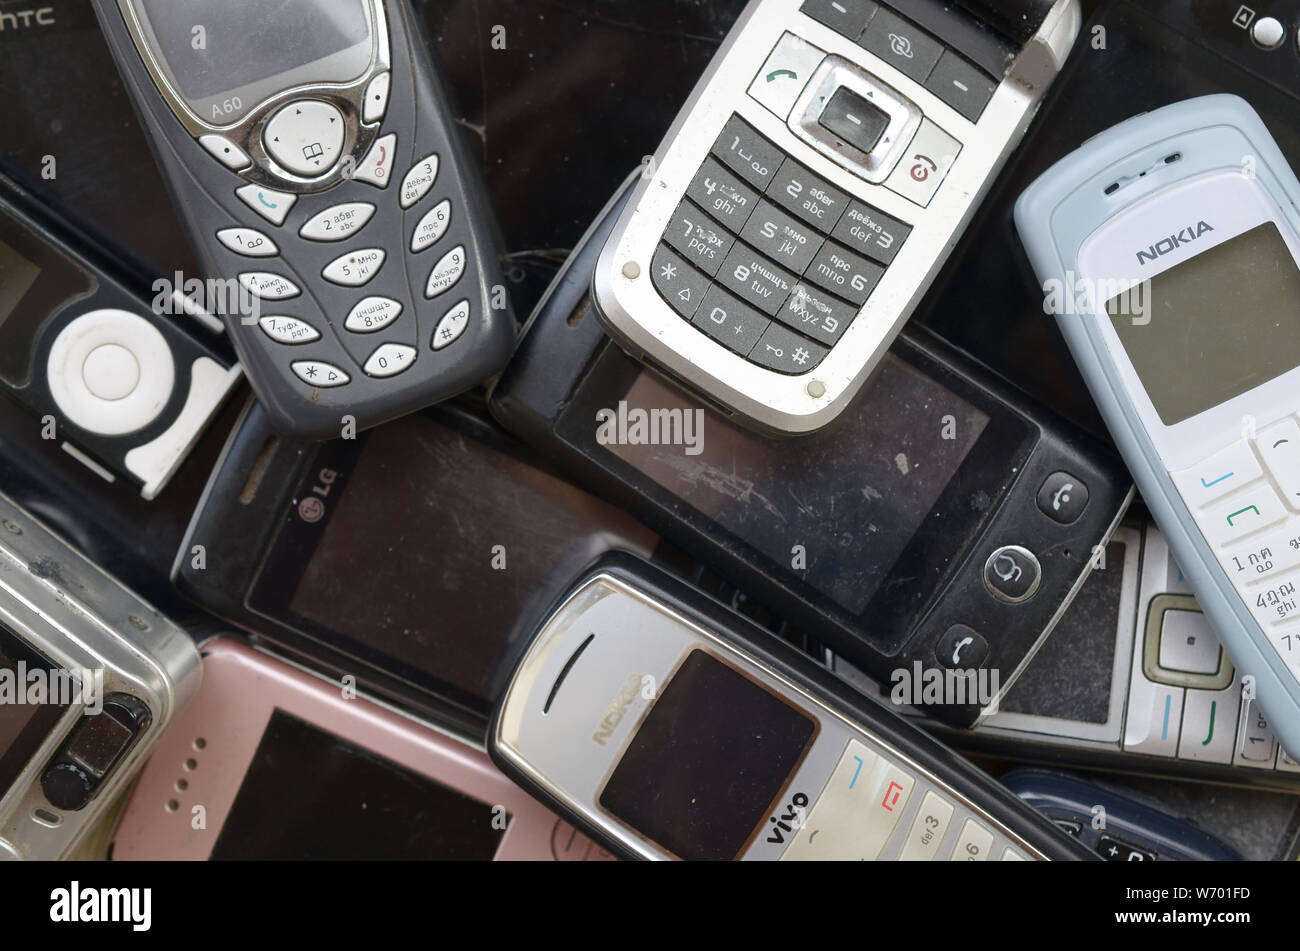 KHARKIV, UKRAINE - JULY 30, 2019: A few old used outdated mobile phones. Recycling electronics of many brands was sold in the market cheap. Flat lay t Stock Photo